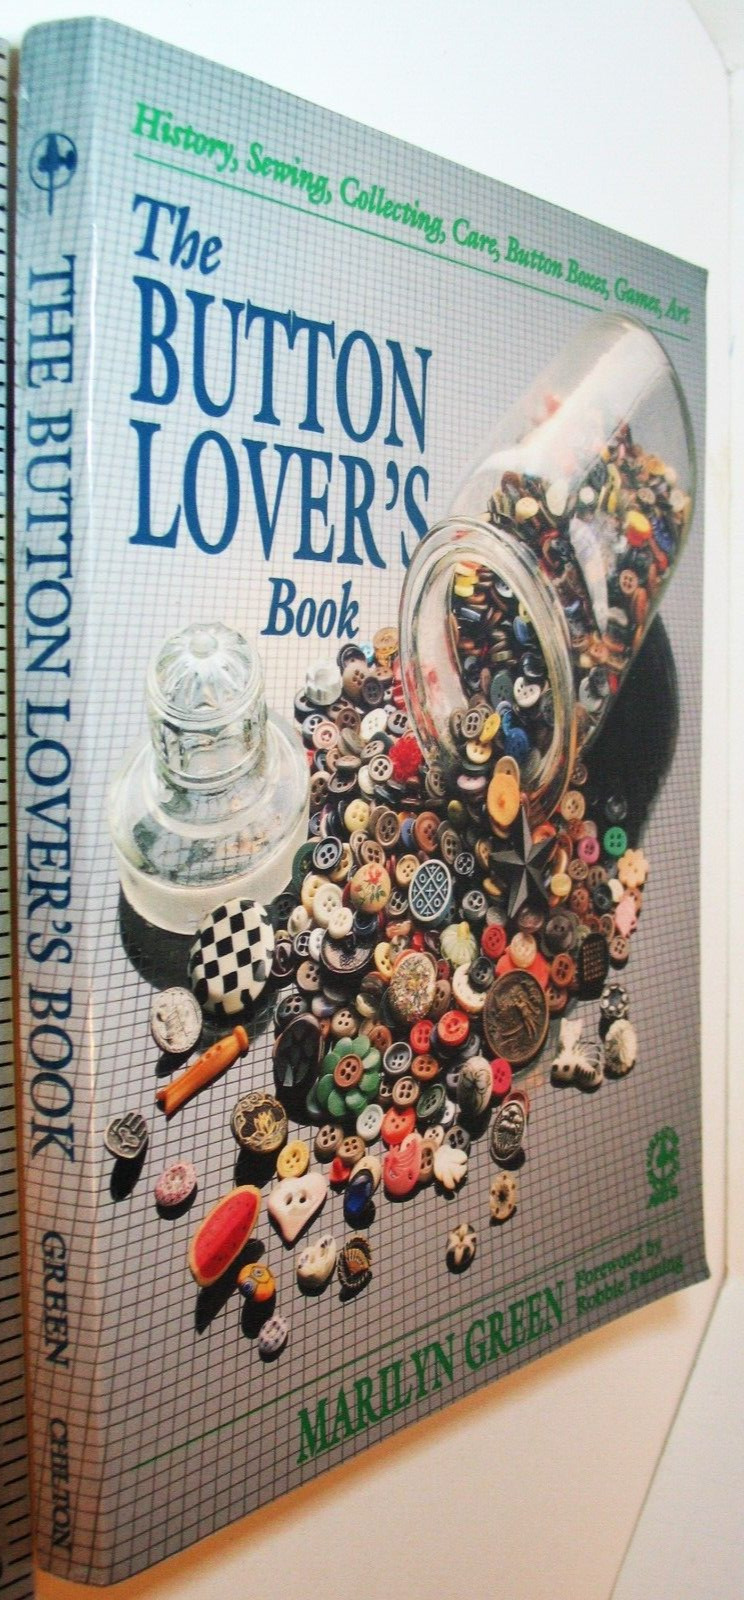 The Button Lover\'s Book by Marilyn Green 1991 Chilton Book Co. Softcover